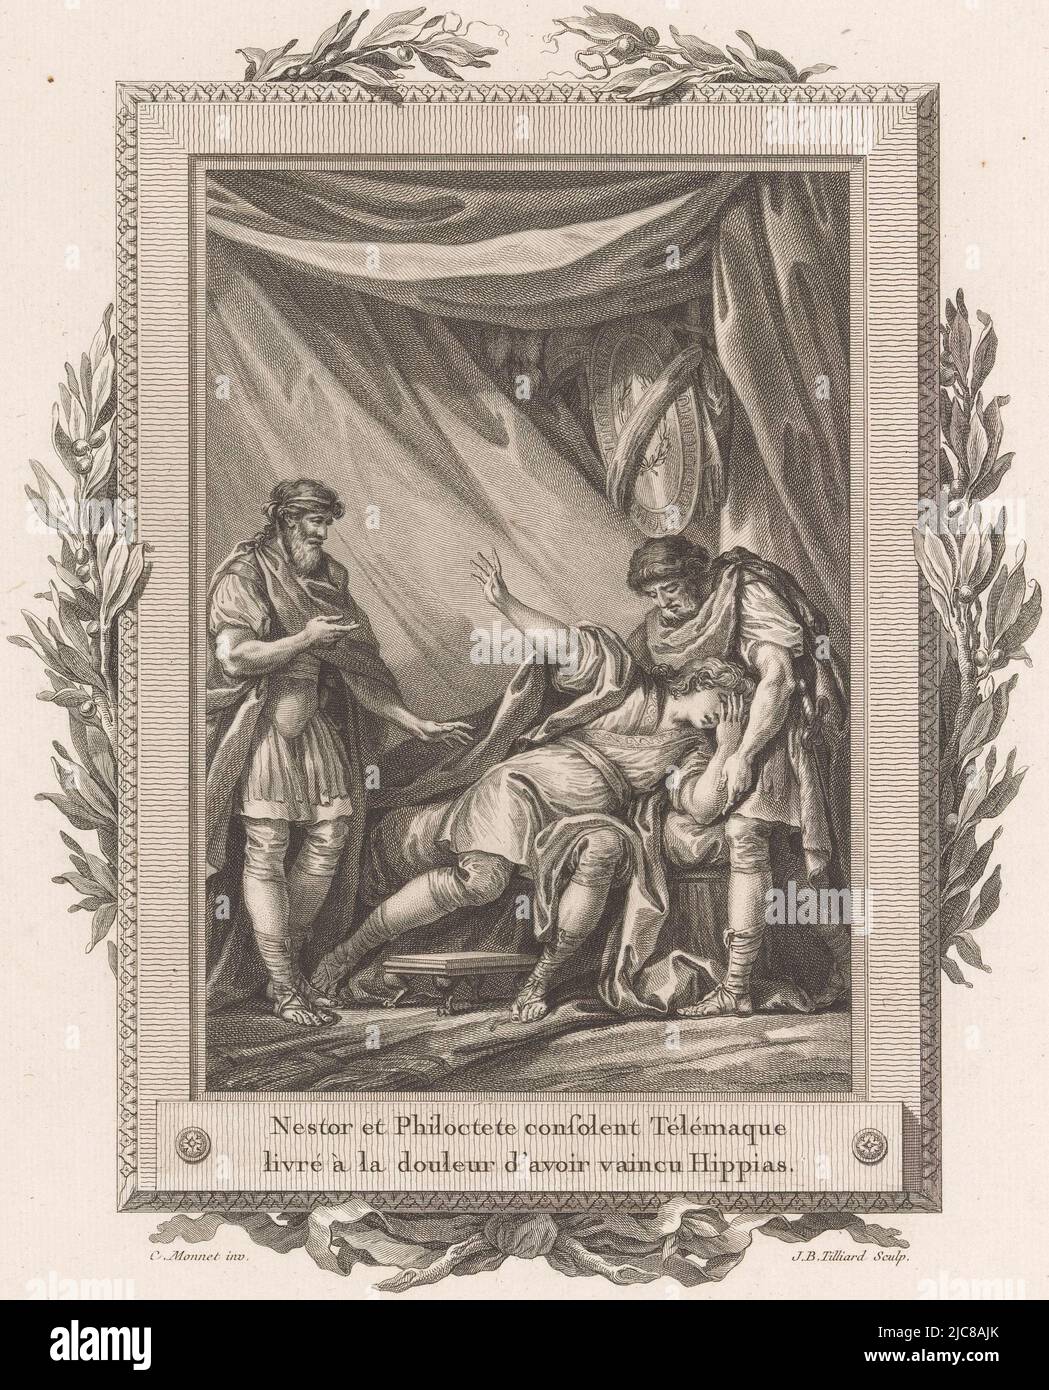 Telemachus, weeping on a bed, is comforted by Nestor and Philoctetes in a tent. The scene is framed by an ornamental frame with olive branches and a bow at the bottom. Numbered upper right: No. II. Telemachus comforted by Nestor and Philoctetes, print maker: Jean-Baptiste Tilliard, (mentioned on object), intermediary draughtsman: Charles Monnet, (mentioned on object), publisher: Pierre Didot, print maker: France, intermediary draughtsman: France, publisher: Paris, publisher: Paris, publisher: Paris, publisher: Paris, publisher: Paris, 1785, paper, etching, engraving, h 315 mm × w 243 mm Stock Photo